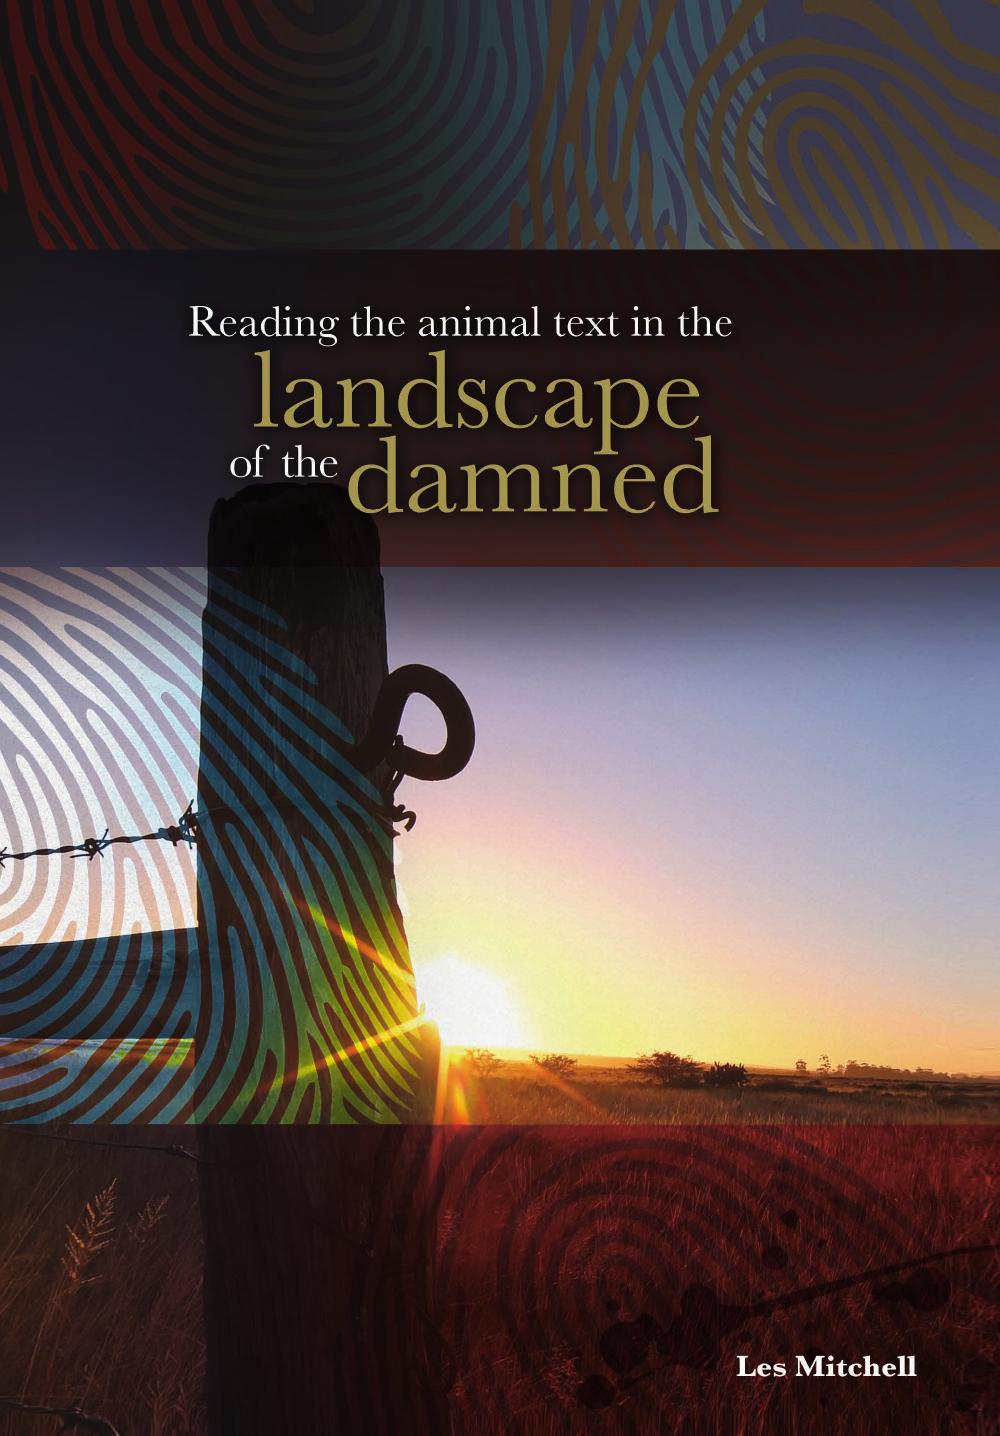 Reading the Animal Text in the Landscape of the Damned by Les Mitchell